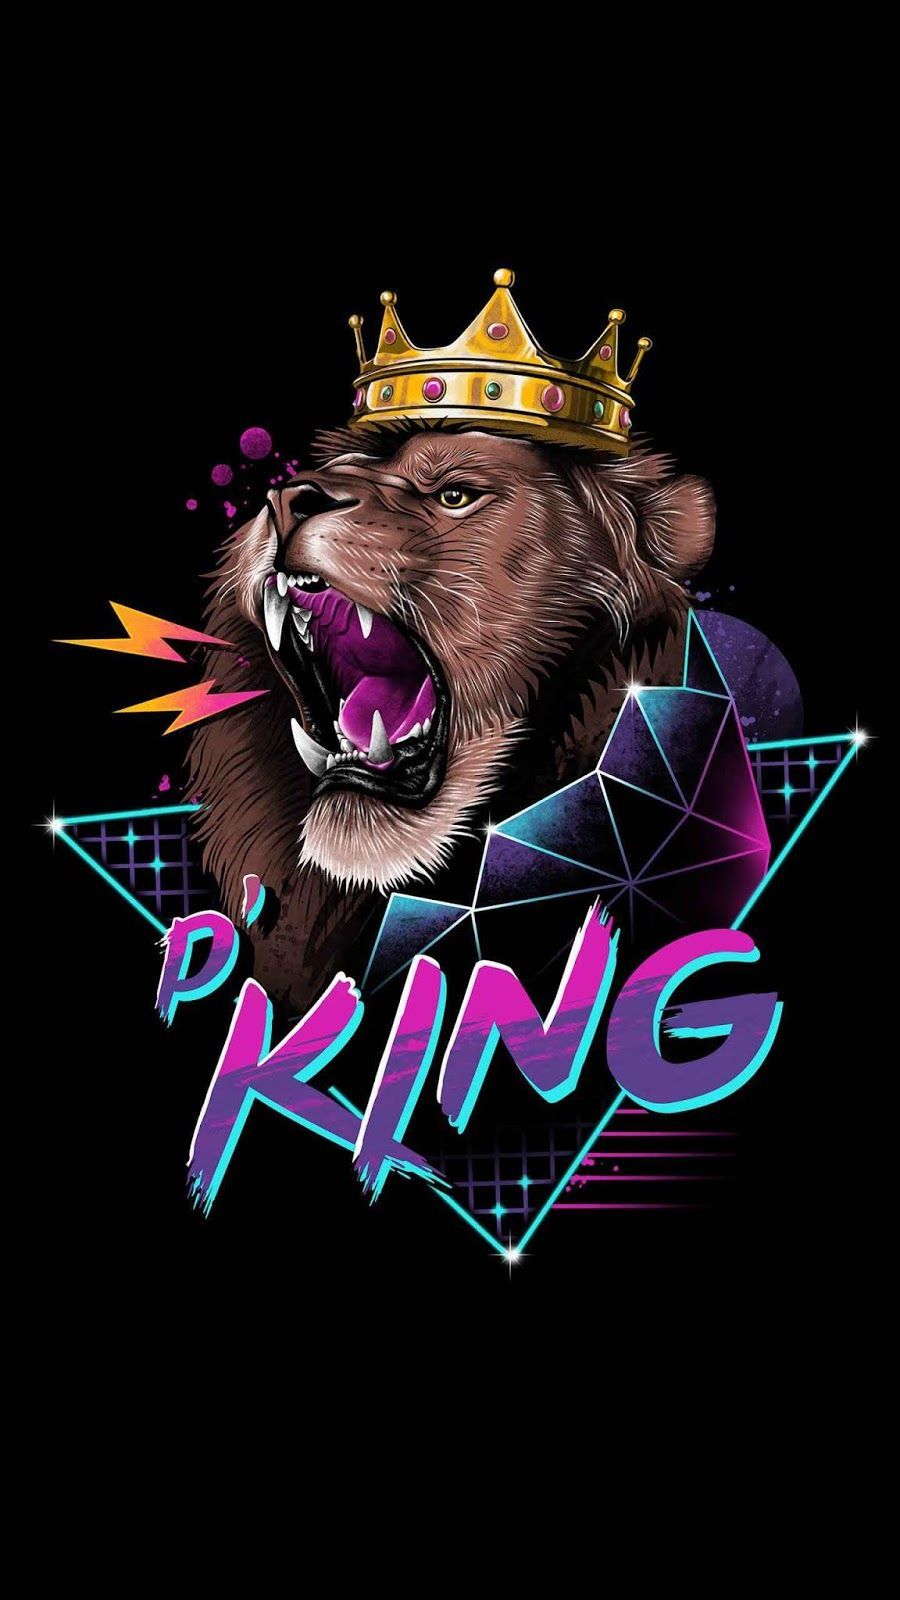 King Crown IPhone Wallpaper HD  IPhone Wallpapers  iPhone Wallpapers